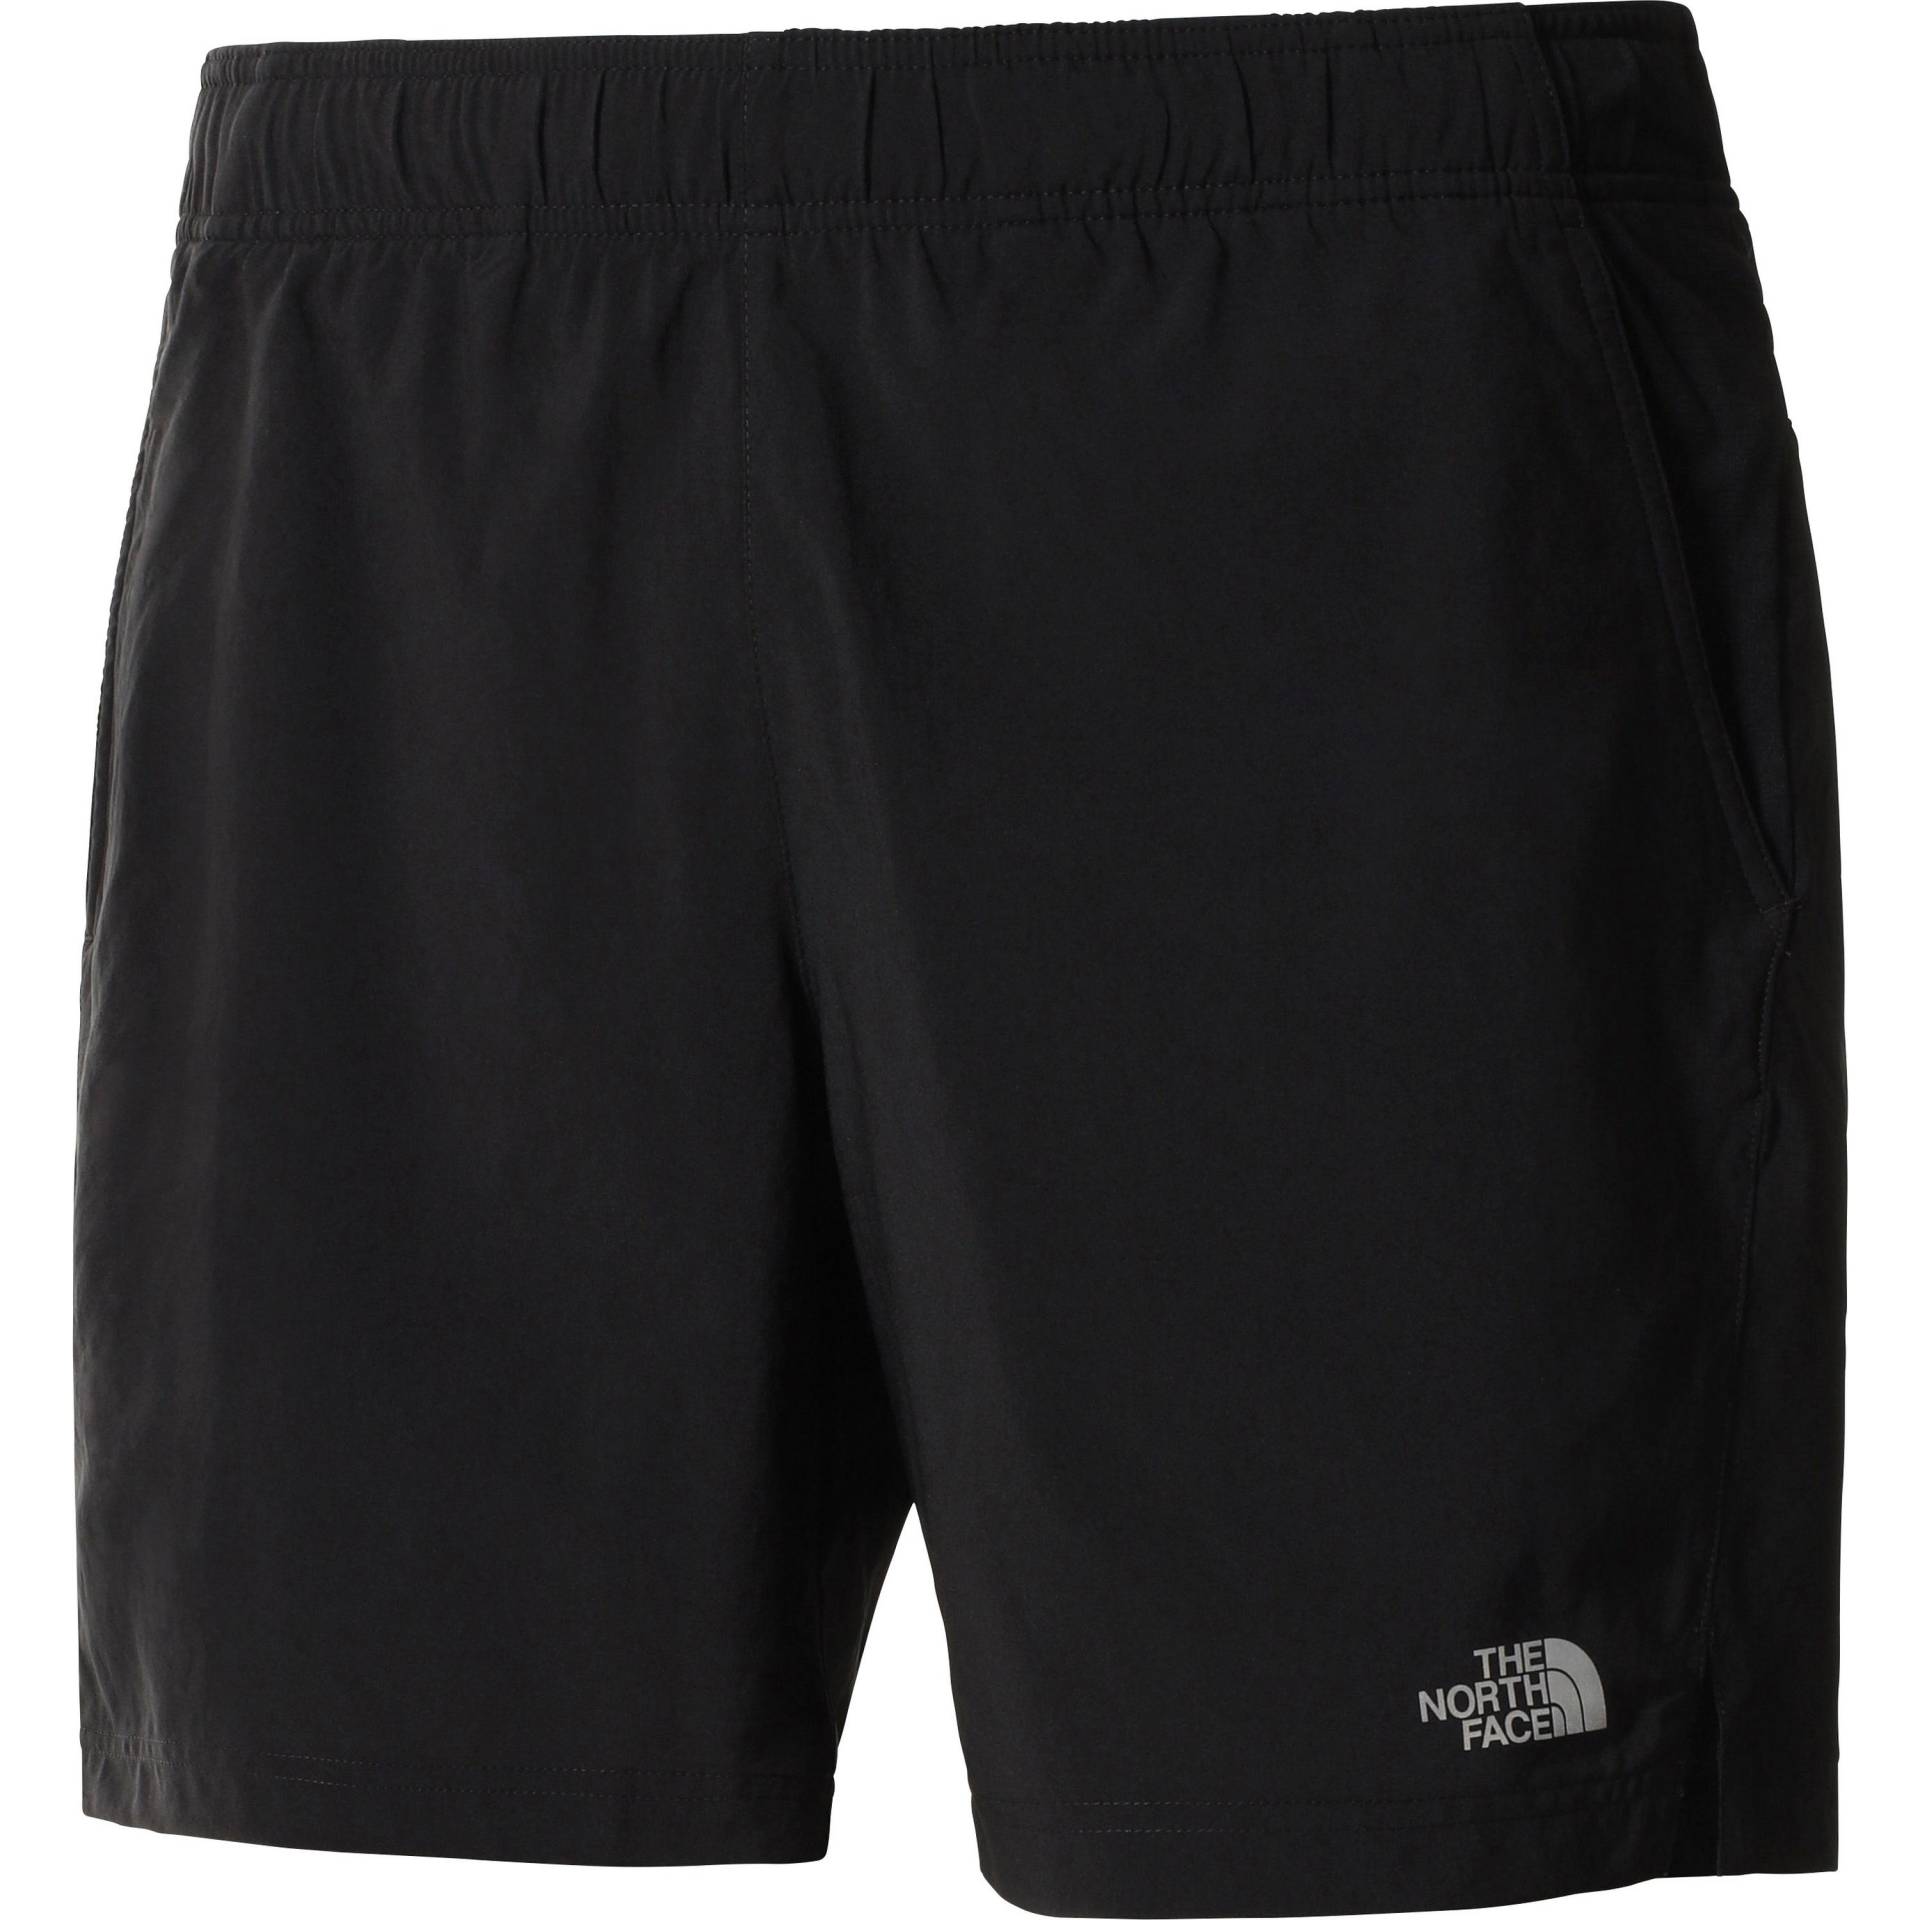 The North Face 24/7 Funktionsshorts Herren von The North Face